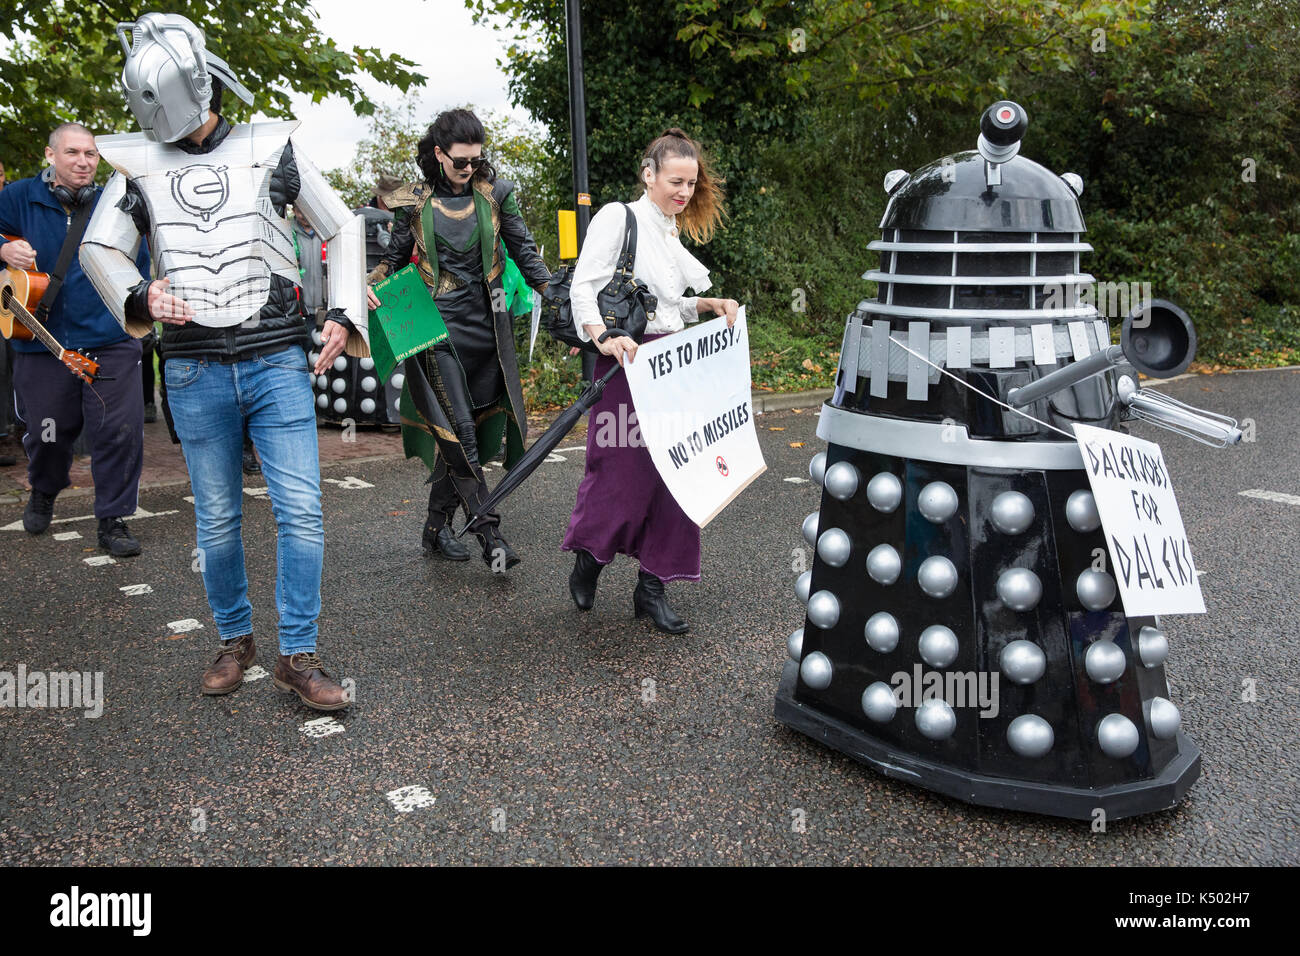 London, UK. 8th Sep, 2017. Daleks and other super villains protest against the DSEI arms fair to be held at the ExCel Centre next week. DSEI is one of the world's largest arms fairs and military delegations from states believed to be responsible for widespread abuses of human rights are expected to attend. Credit: Mark Kerrison/Alamy Live News Stock Photo